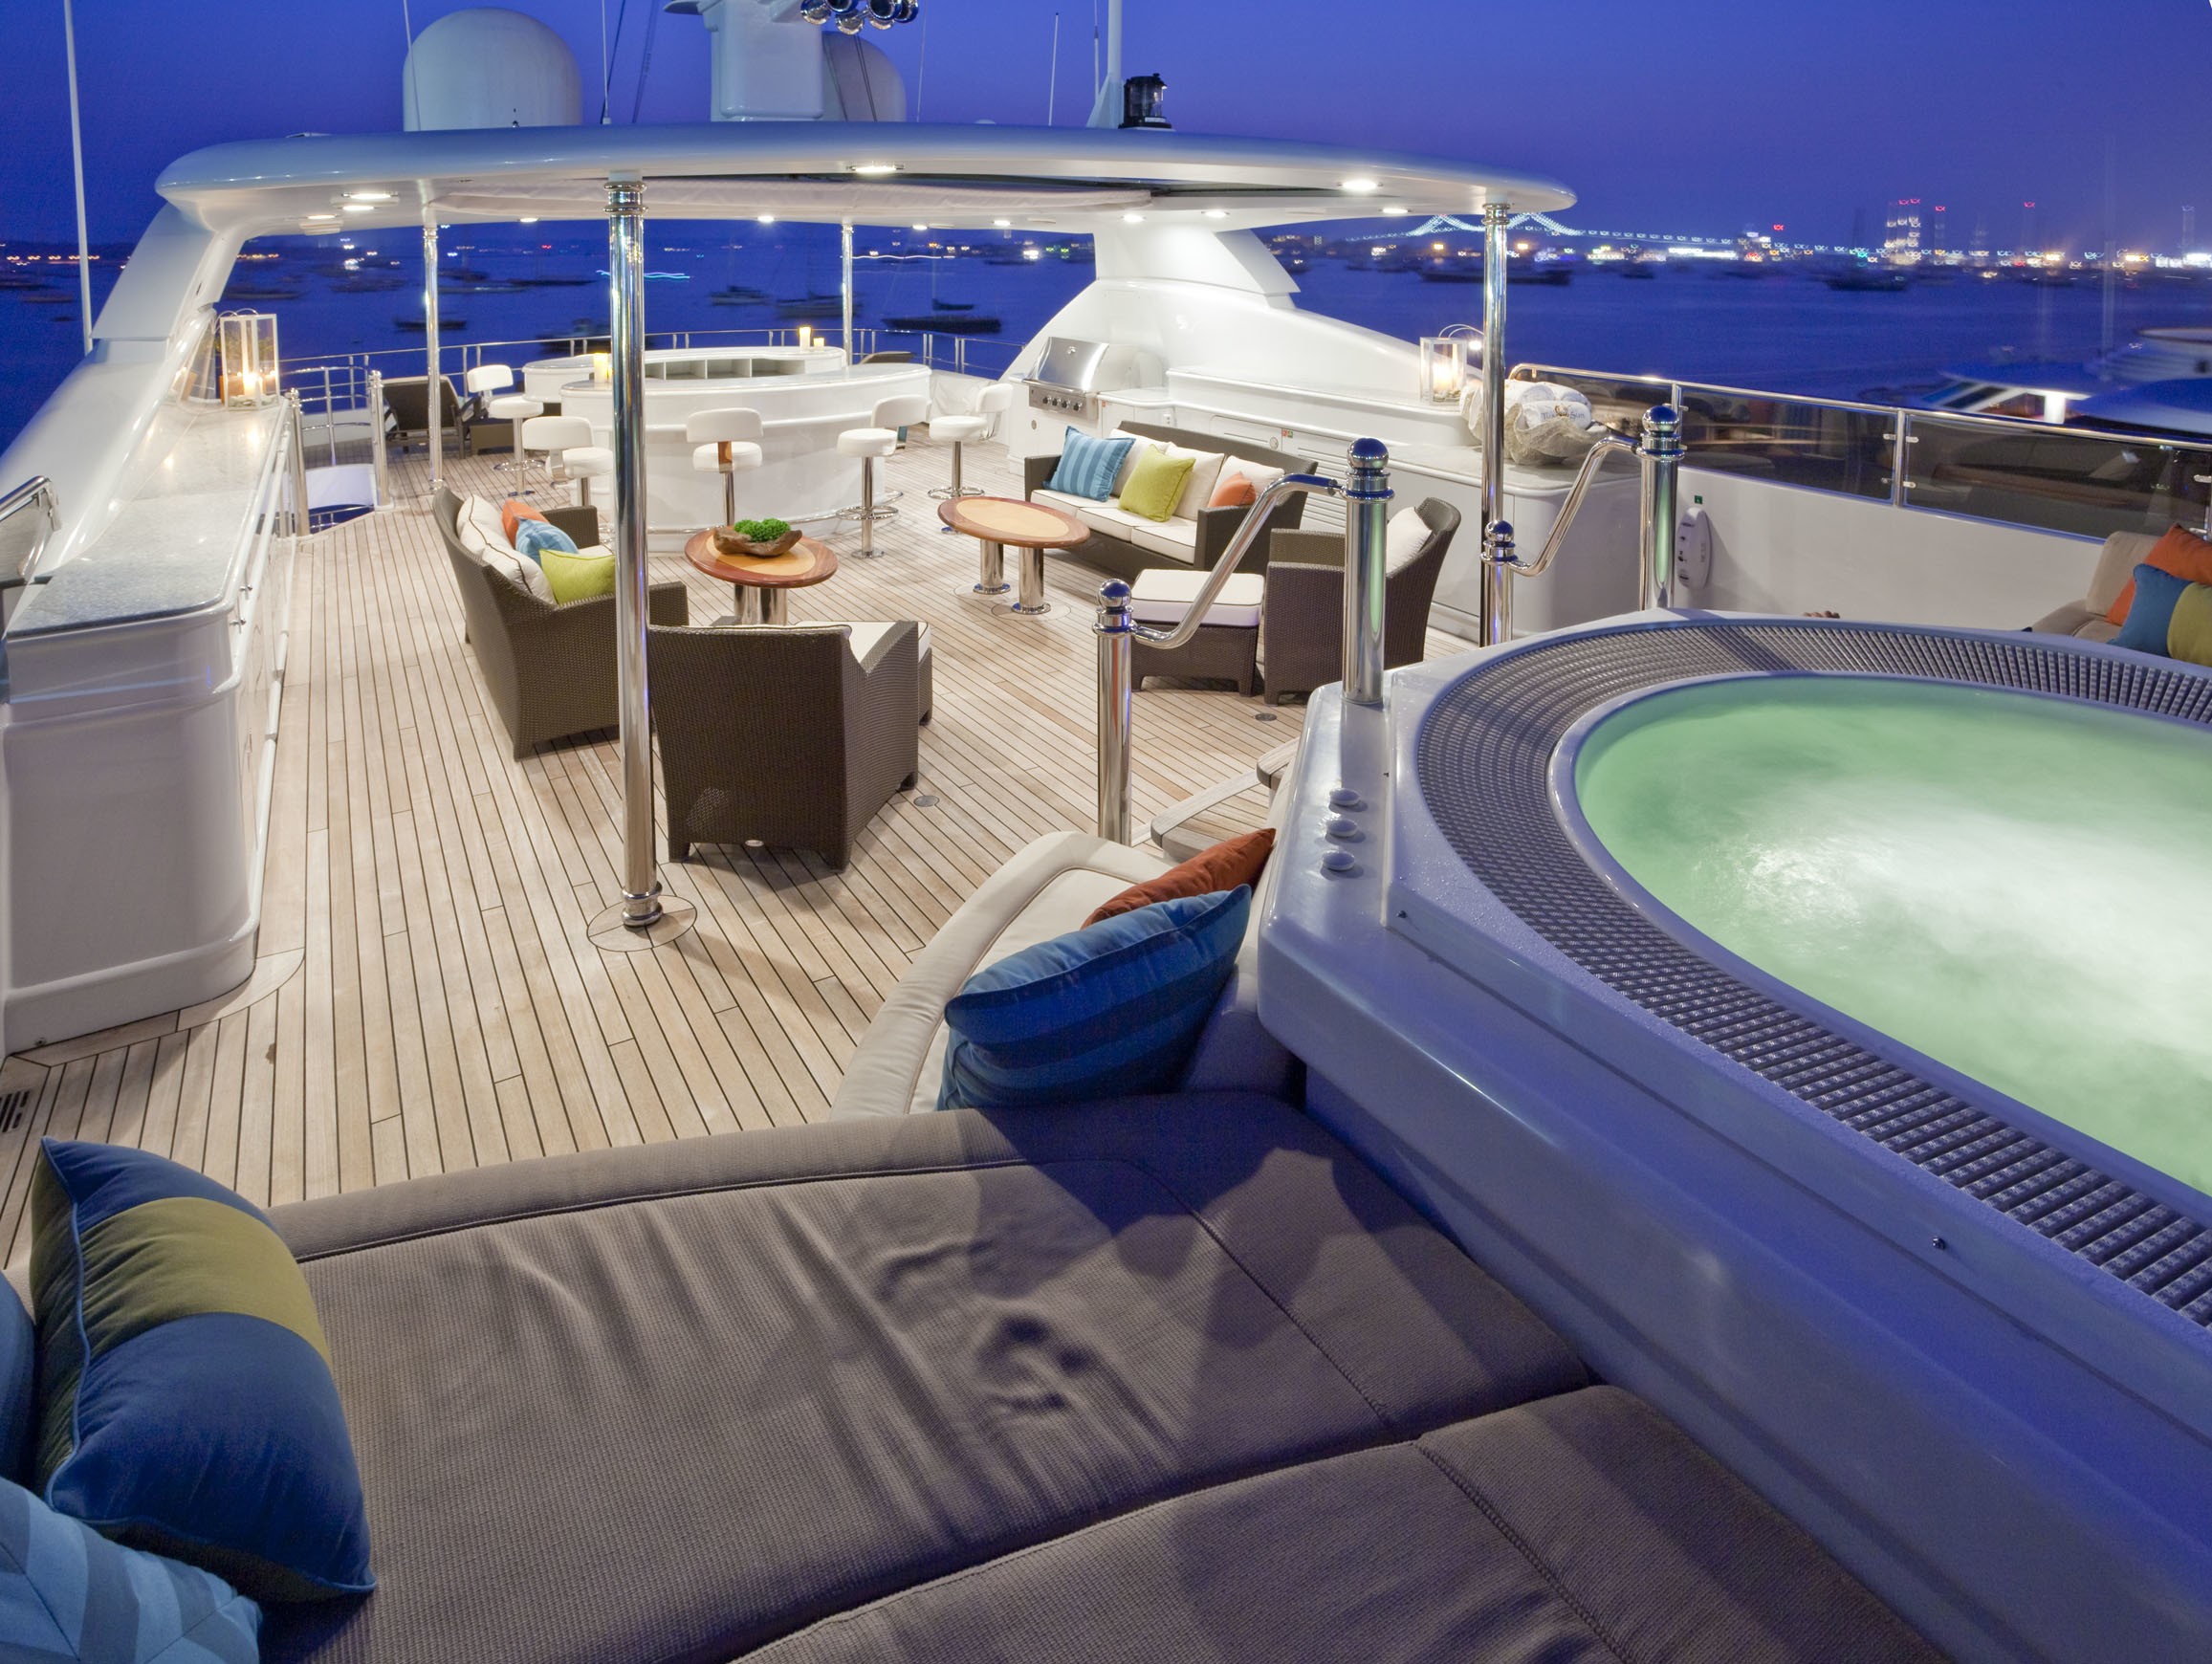 Jacuzzi Pool With Sitting On Yacht COCO VIENTE